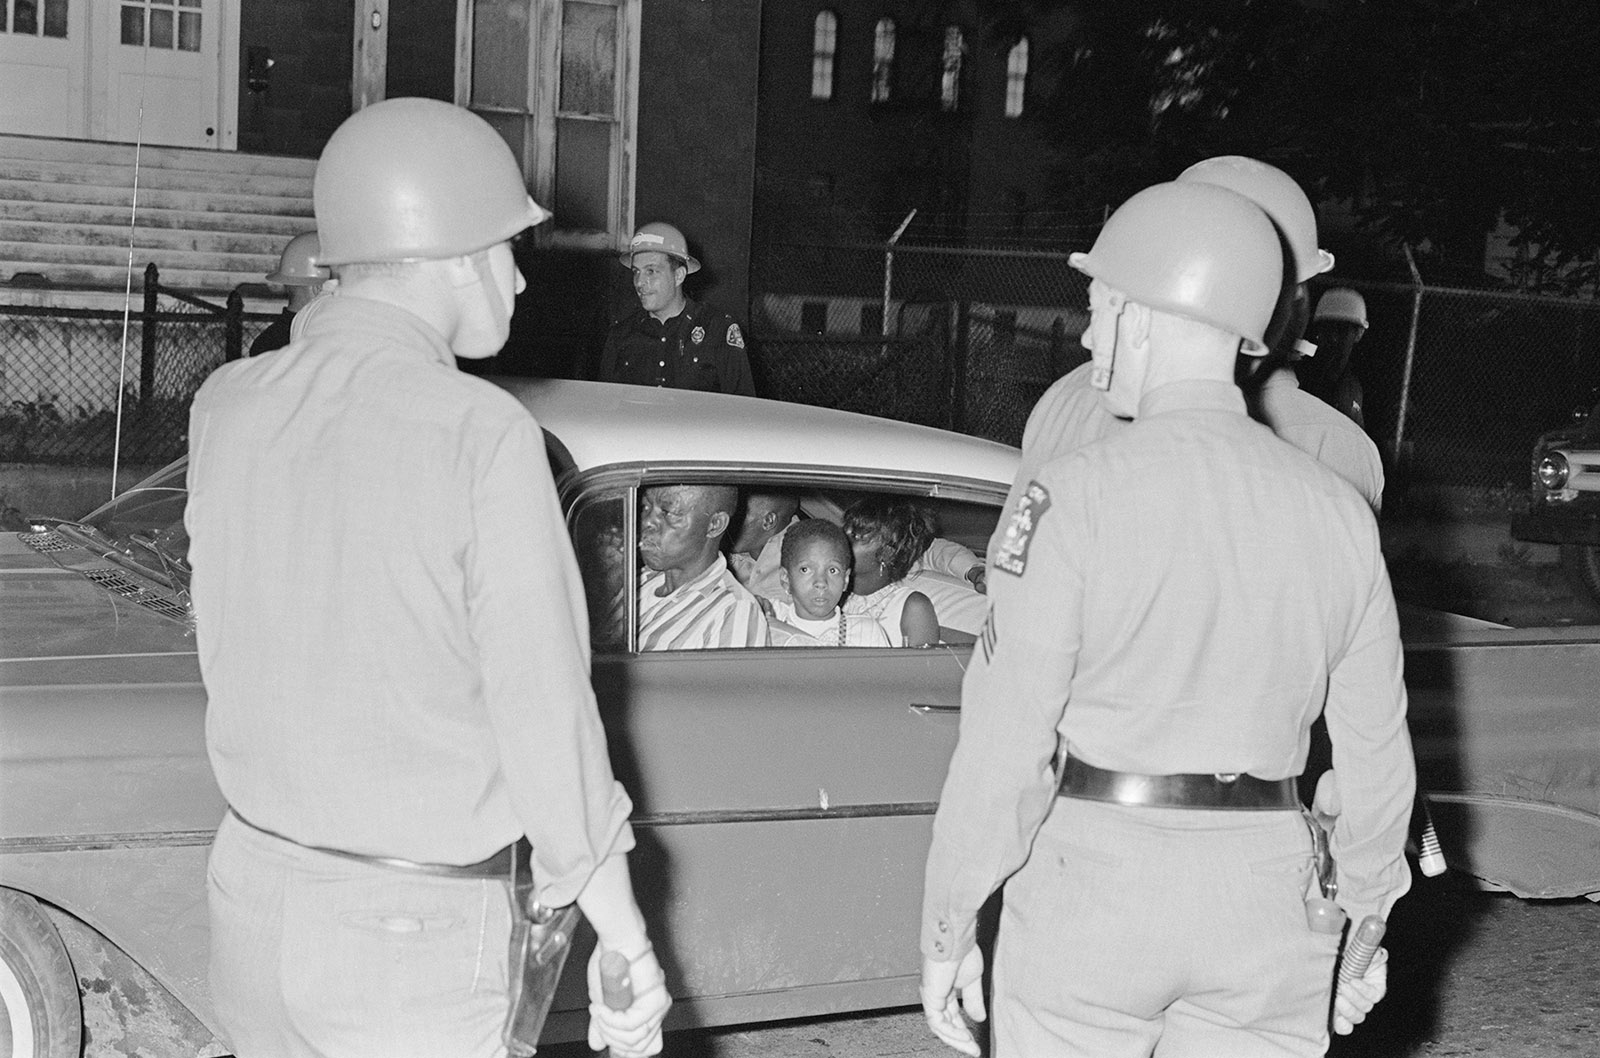 New York State Police officers stopping a black family during the Rochester race riot, July 1964